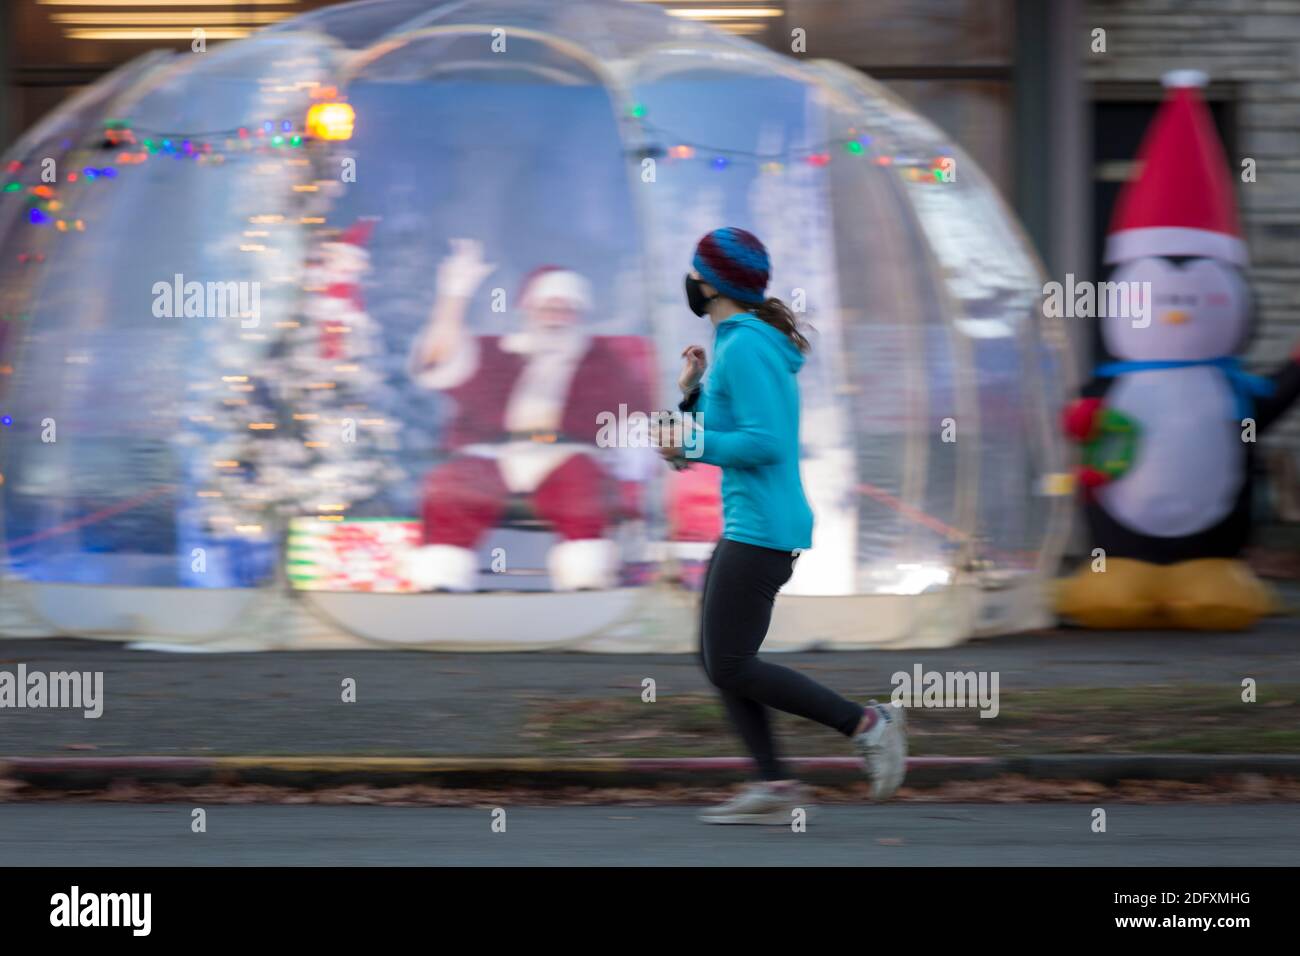 Seattle, Washington, USA. 6th December, 2020. Dan Kemmis, known as the Seattle Santa, waves to a runner from within a protective plastic bubble in Seattle’s Greenwood neighborhood. Unable to schedule private events due to the coronavirus pandemic, Kemmis is making physically distanced public appearances with some donations benefiting local homeless shelters. Credit: Paul Christian Gordon/Alamy Live News Stock Photo